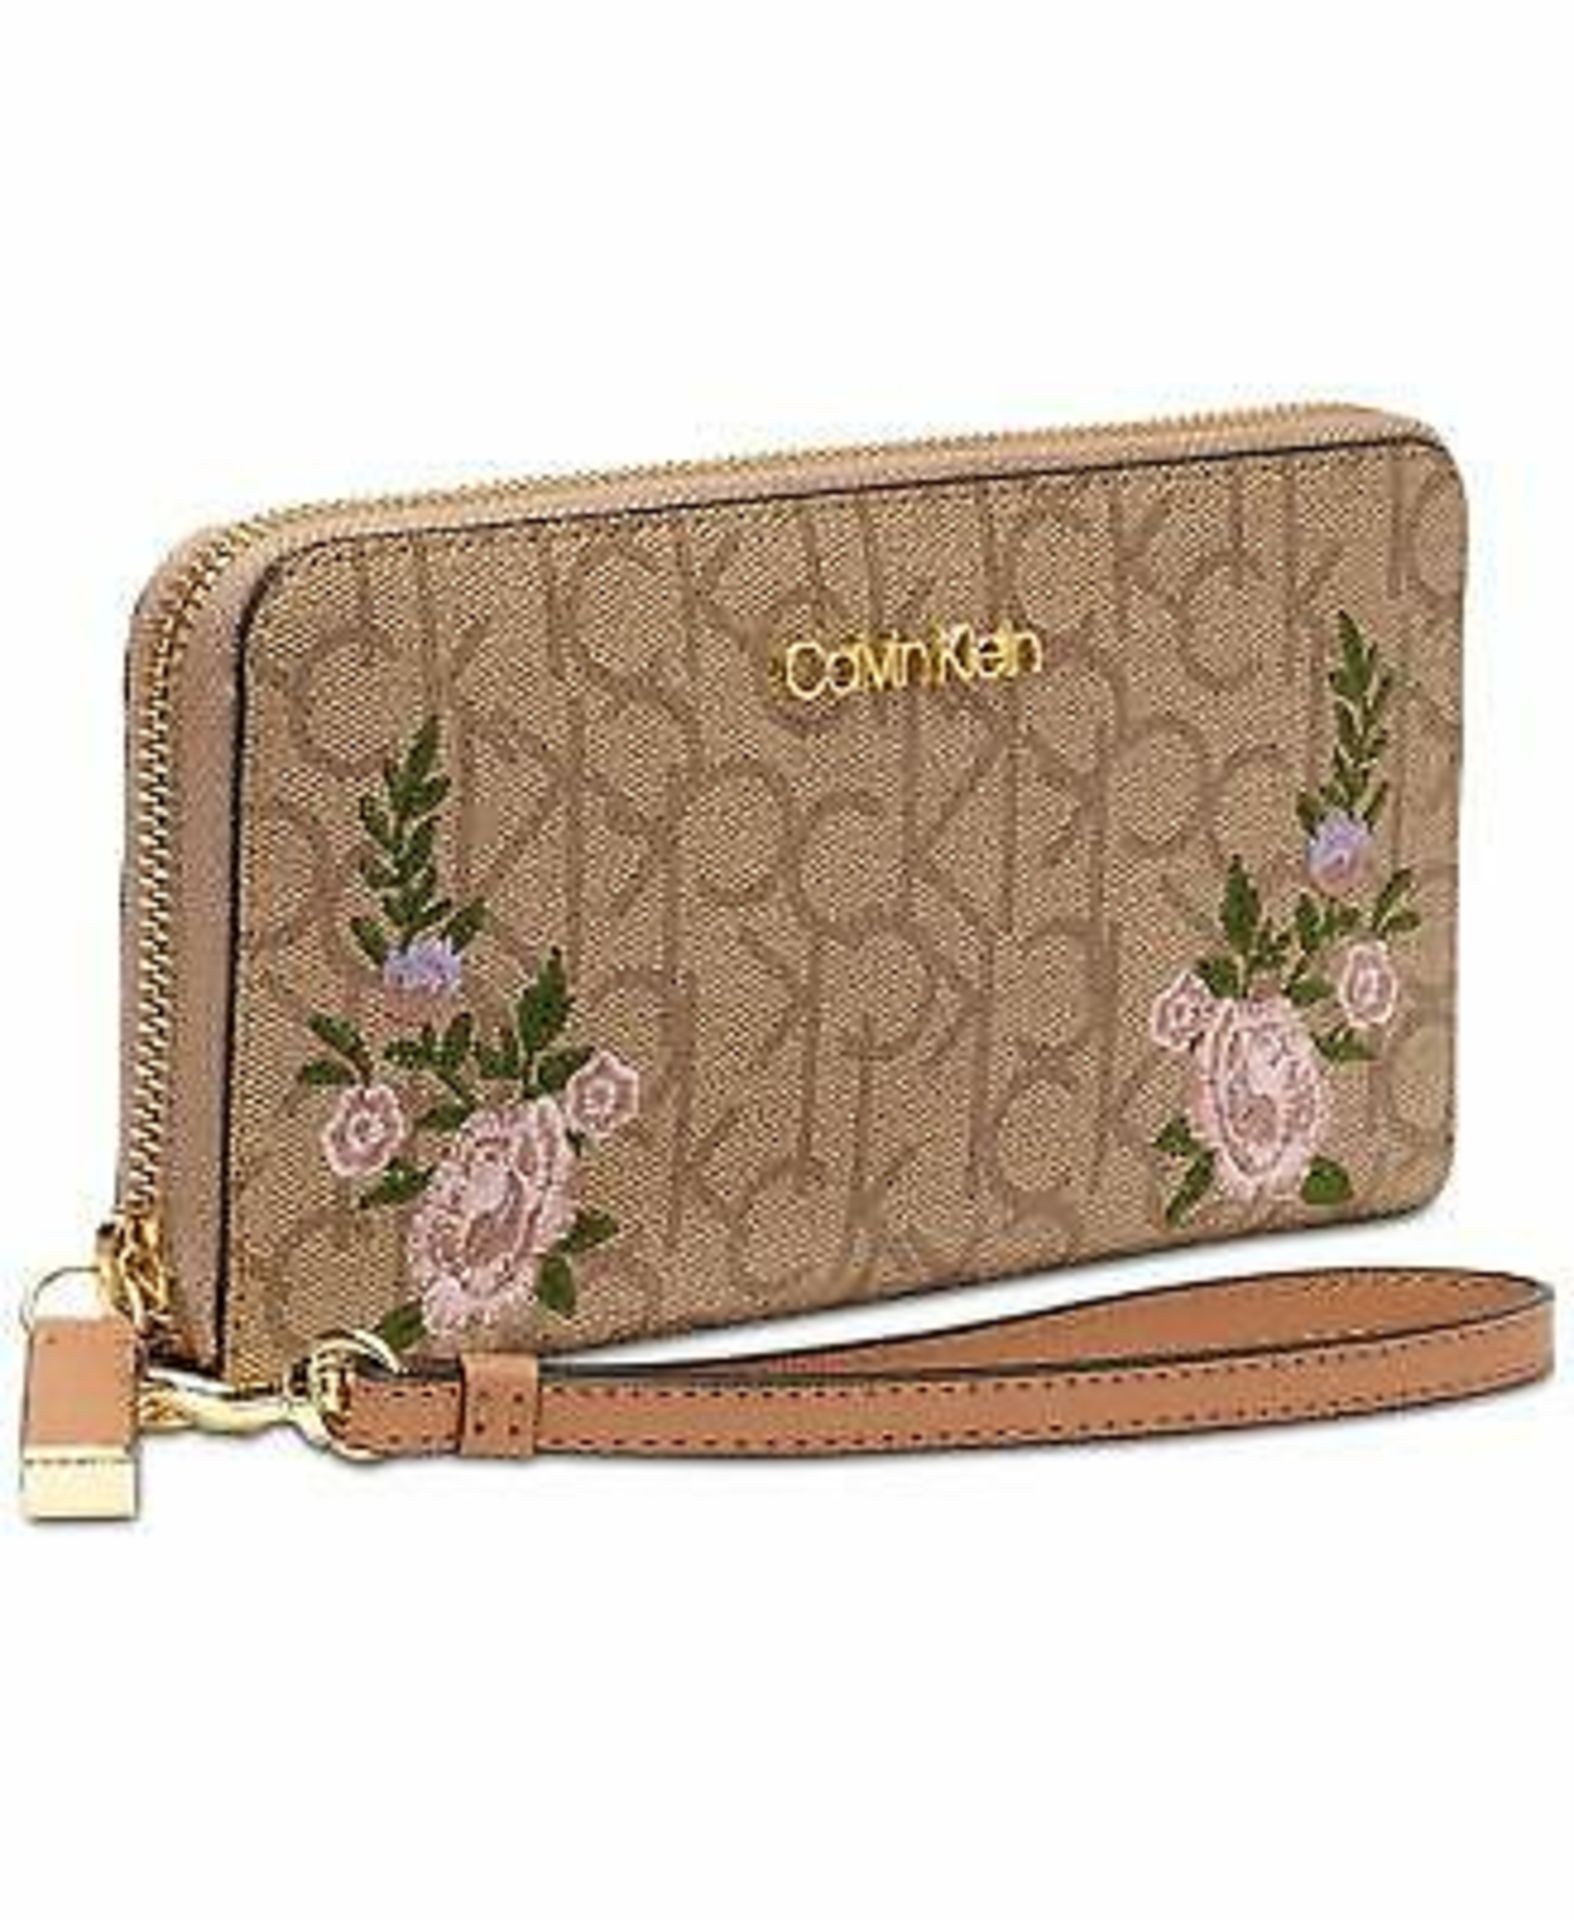 Calvin Klein Pink Floral Embroidered Saffiano Leather Wallet Wristlet RRP £114 - Image 4 of 4